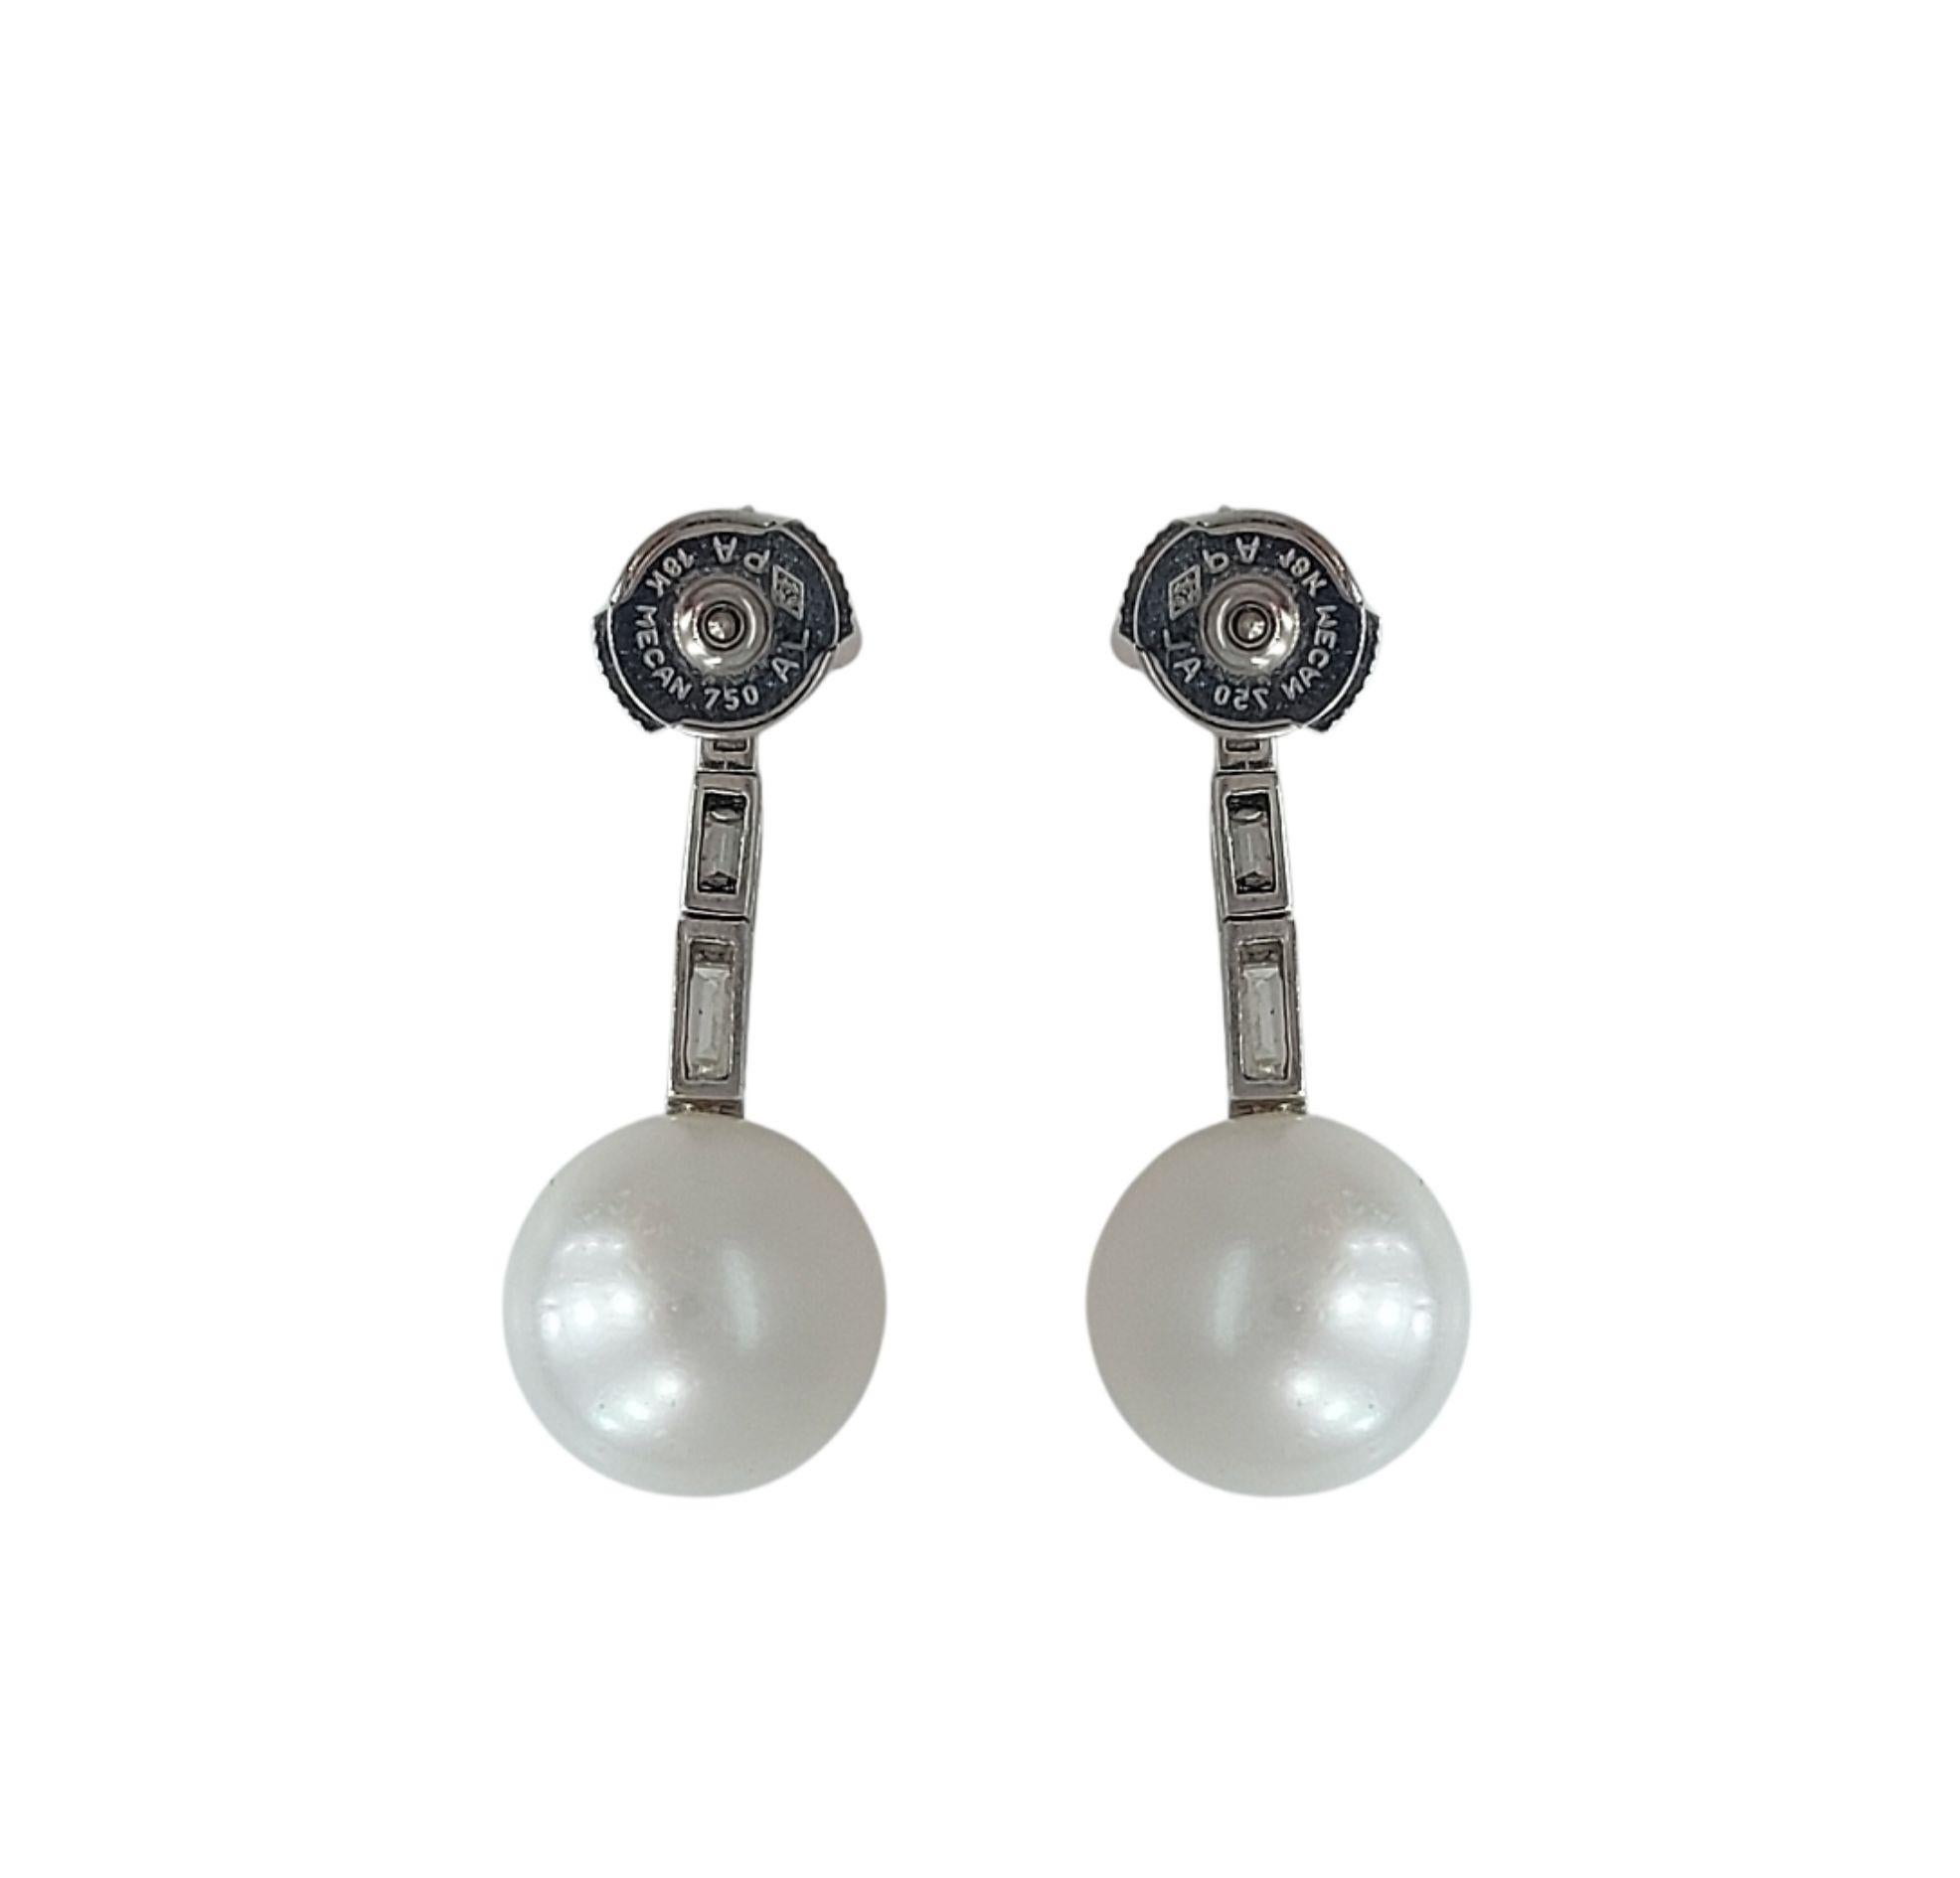 Magnificent 18kt White Gold Earrings With Pearl and Baguette Earrings 

Pearl: South Sea Diameter pearl 12mm

Diamonds: 8 baguette cut diamonds

Material: 18 kt white gold

Measurements: 33 x 2.5 mm

Total weight: 8.7 grams / 5.6 dwt / 0.310 oz
